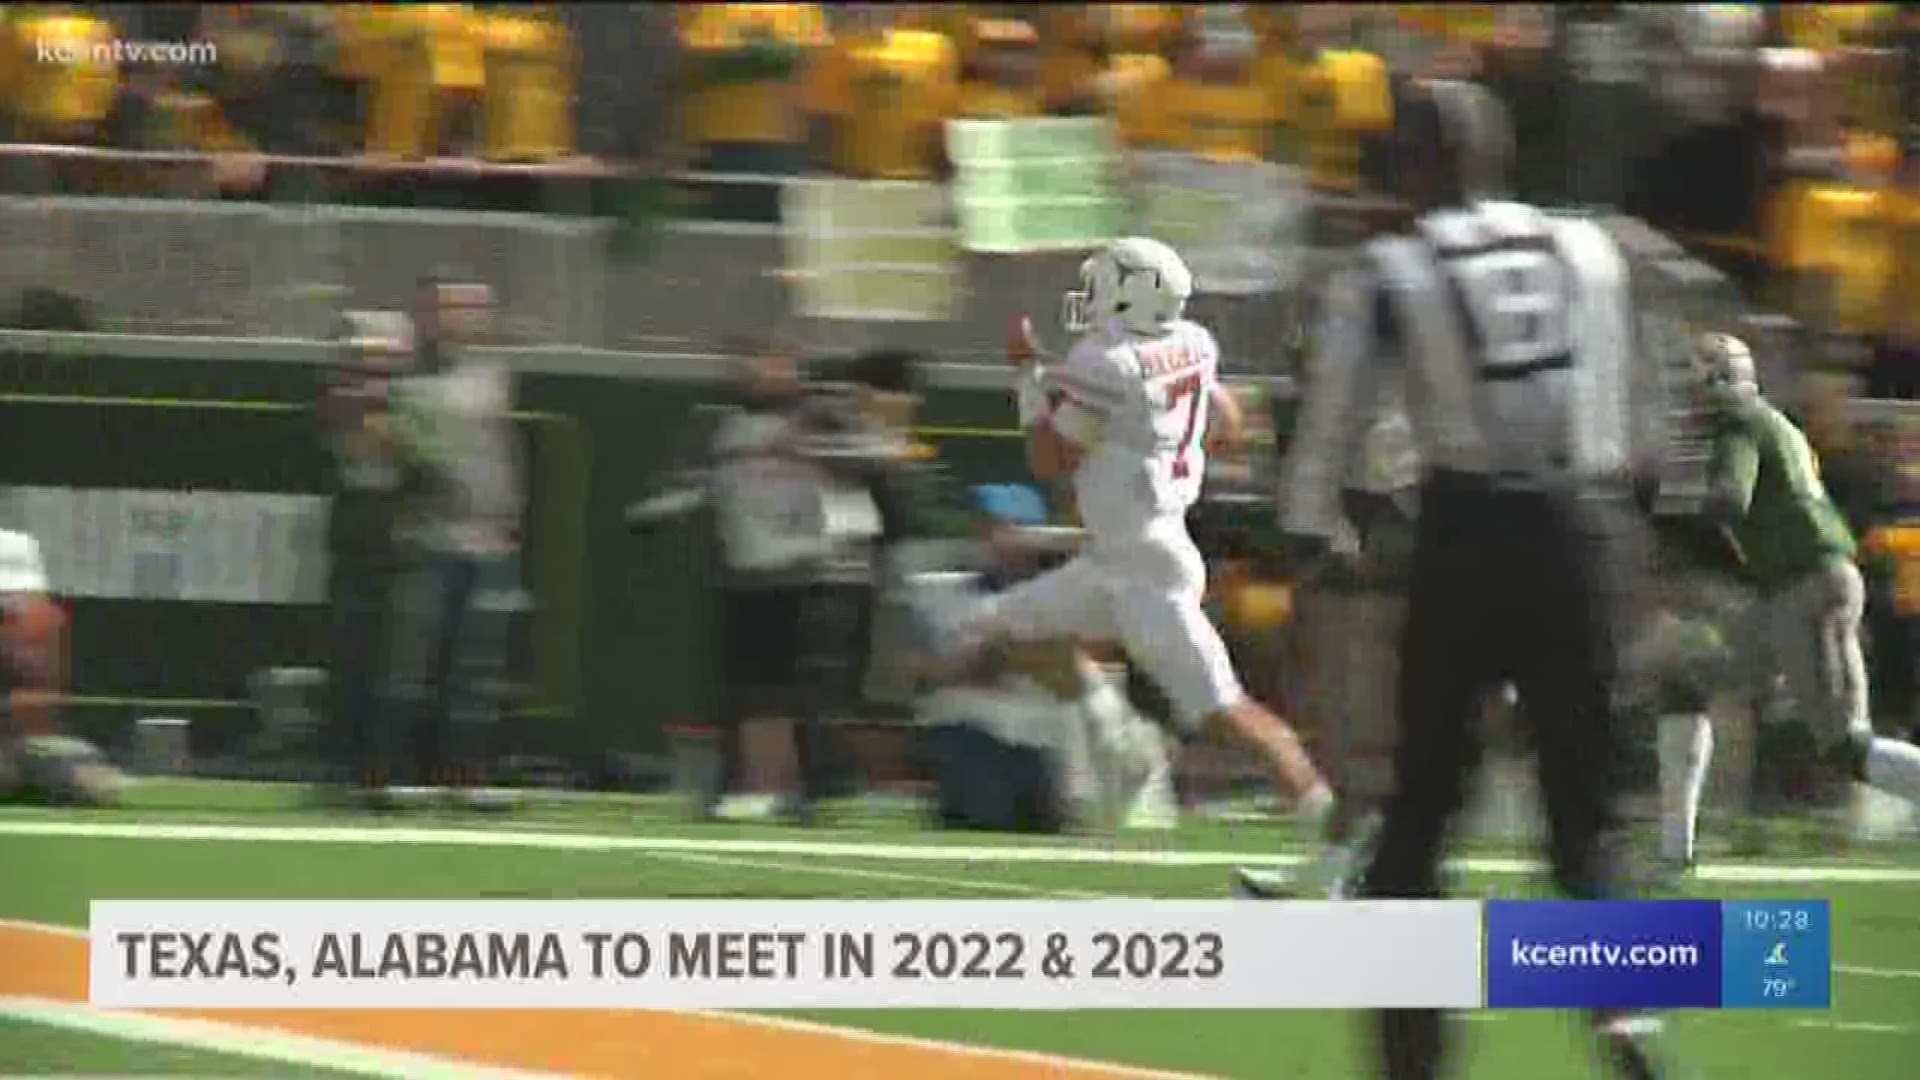 The University of Texas will play a home and home series with defending national champion's Alabama in 2022 & 2023.